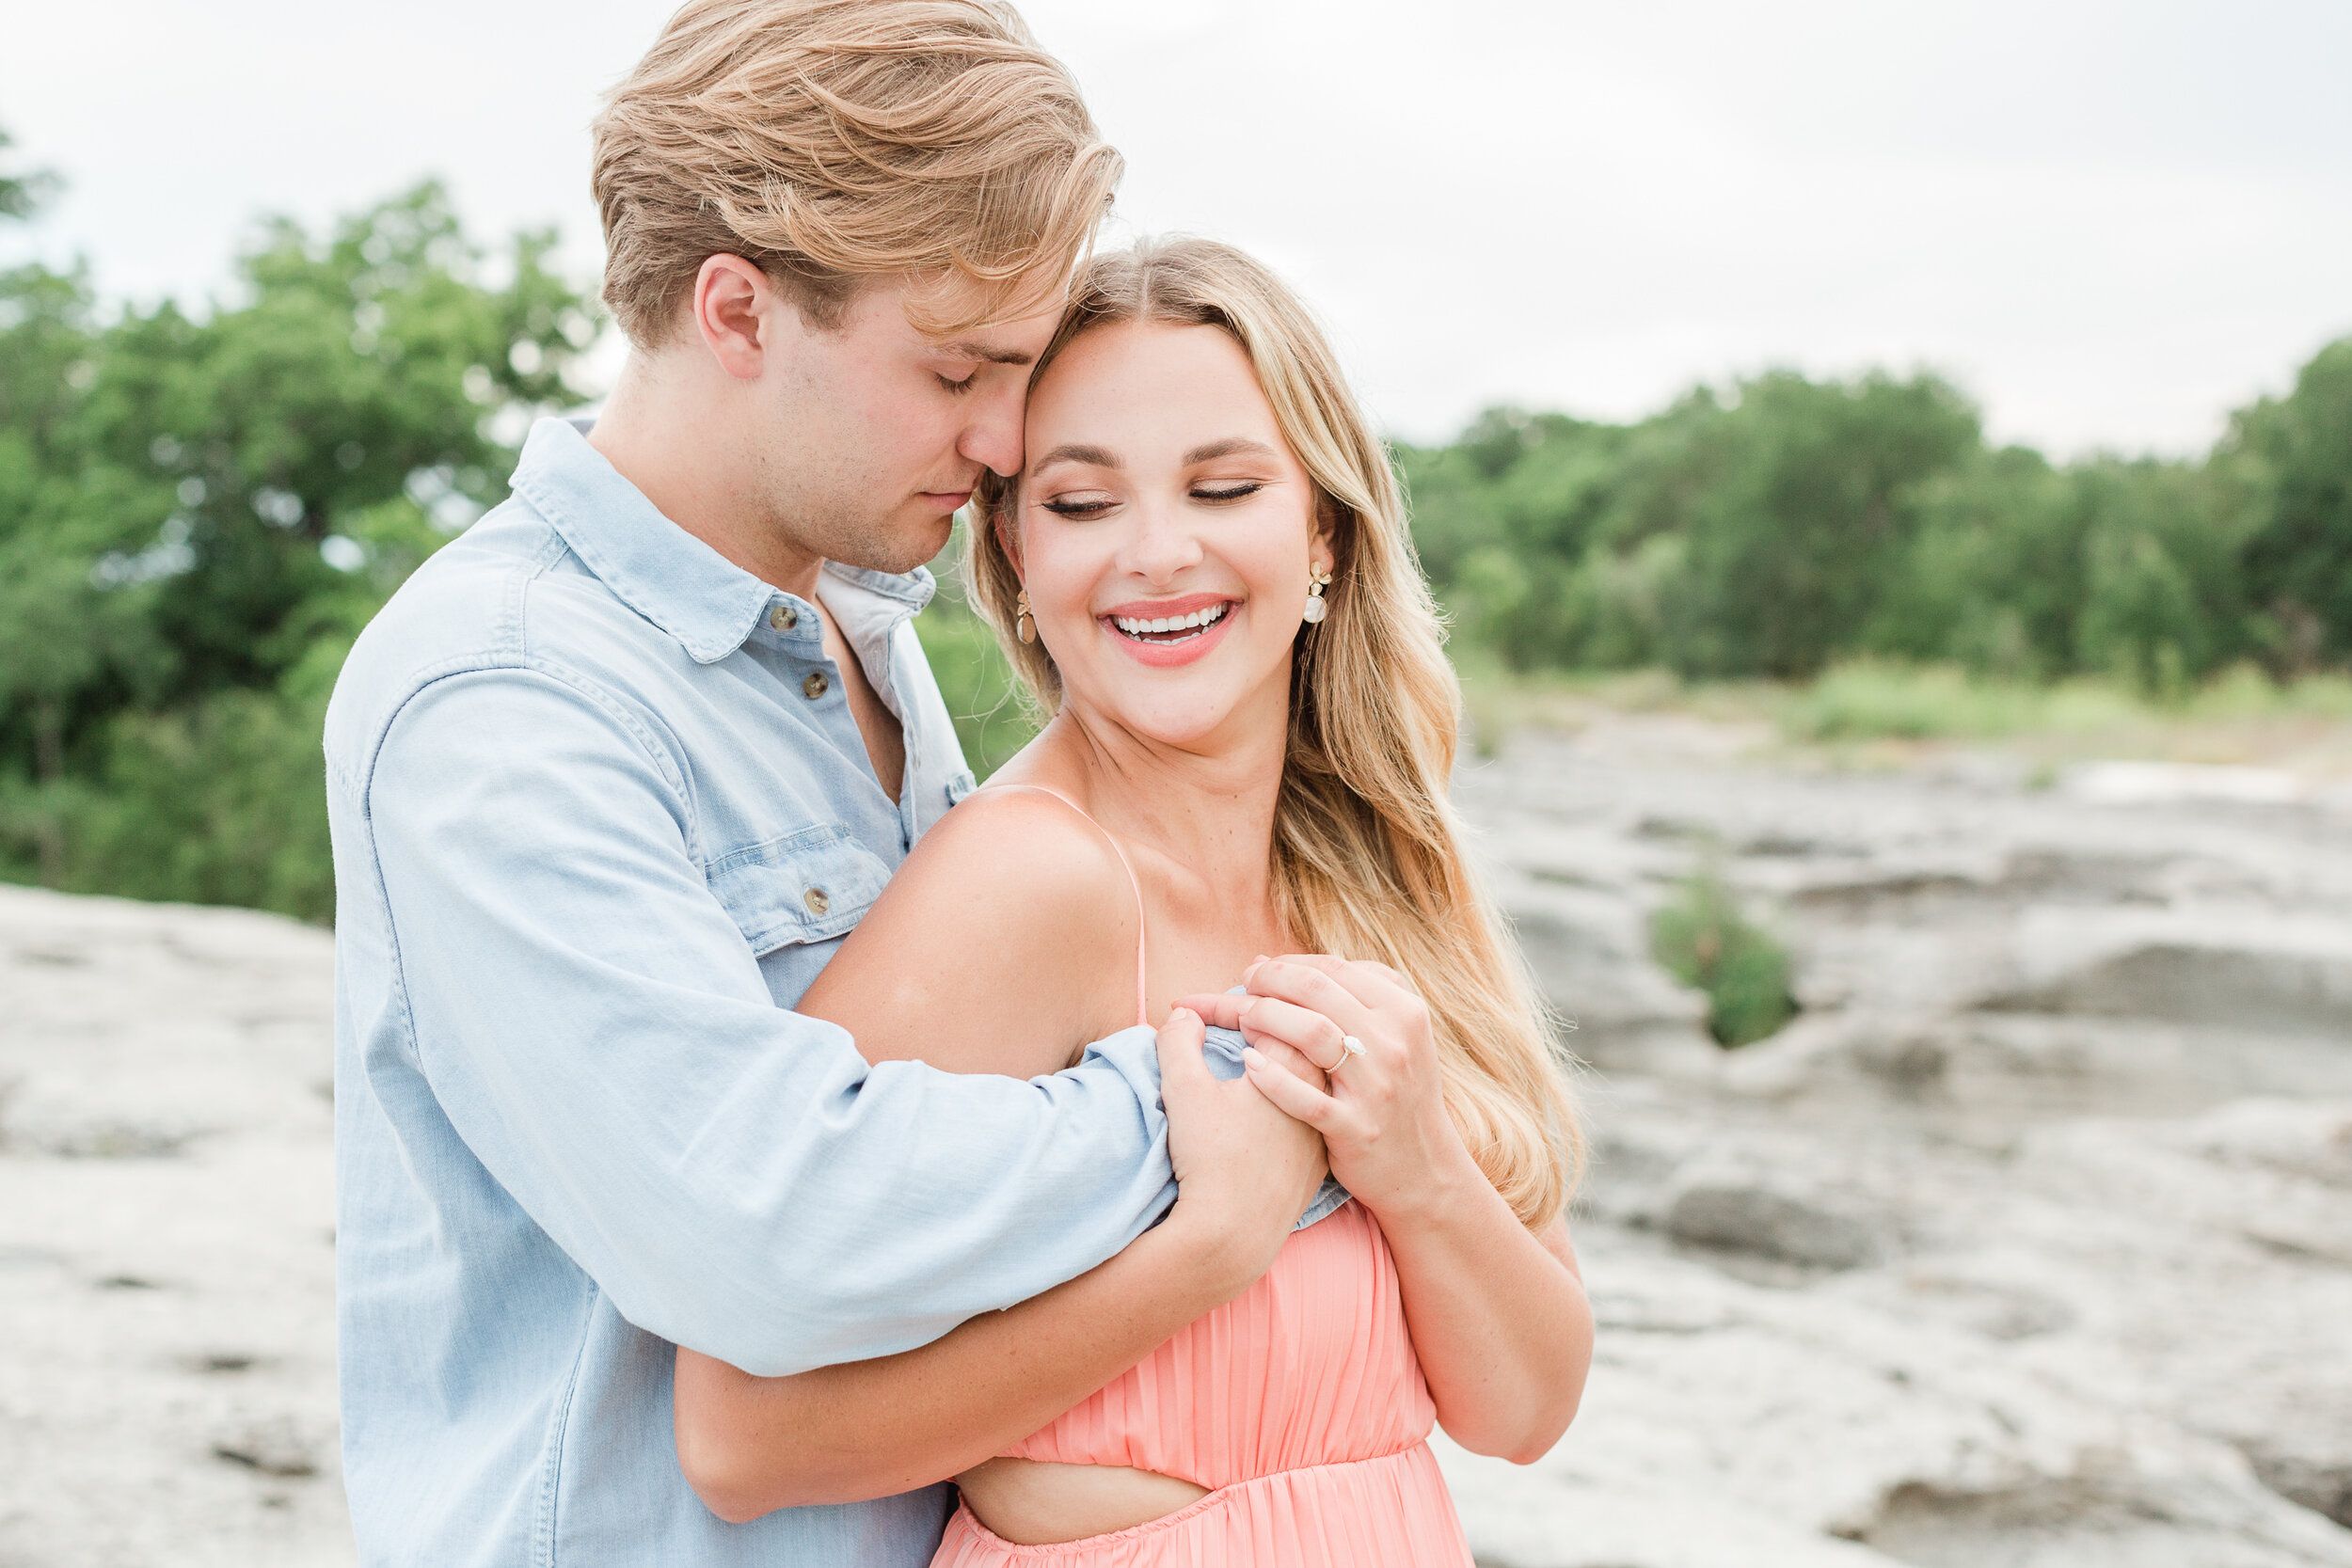 MARY + LOGAN || A Colorful Scenic Engagement Session at Mckinney Falls State Park